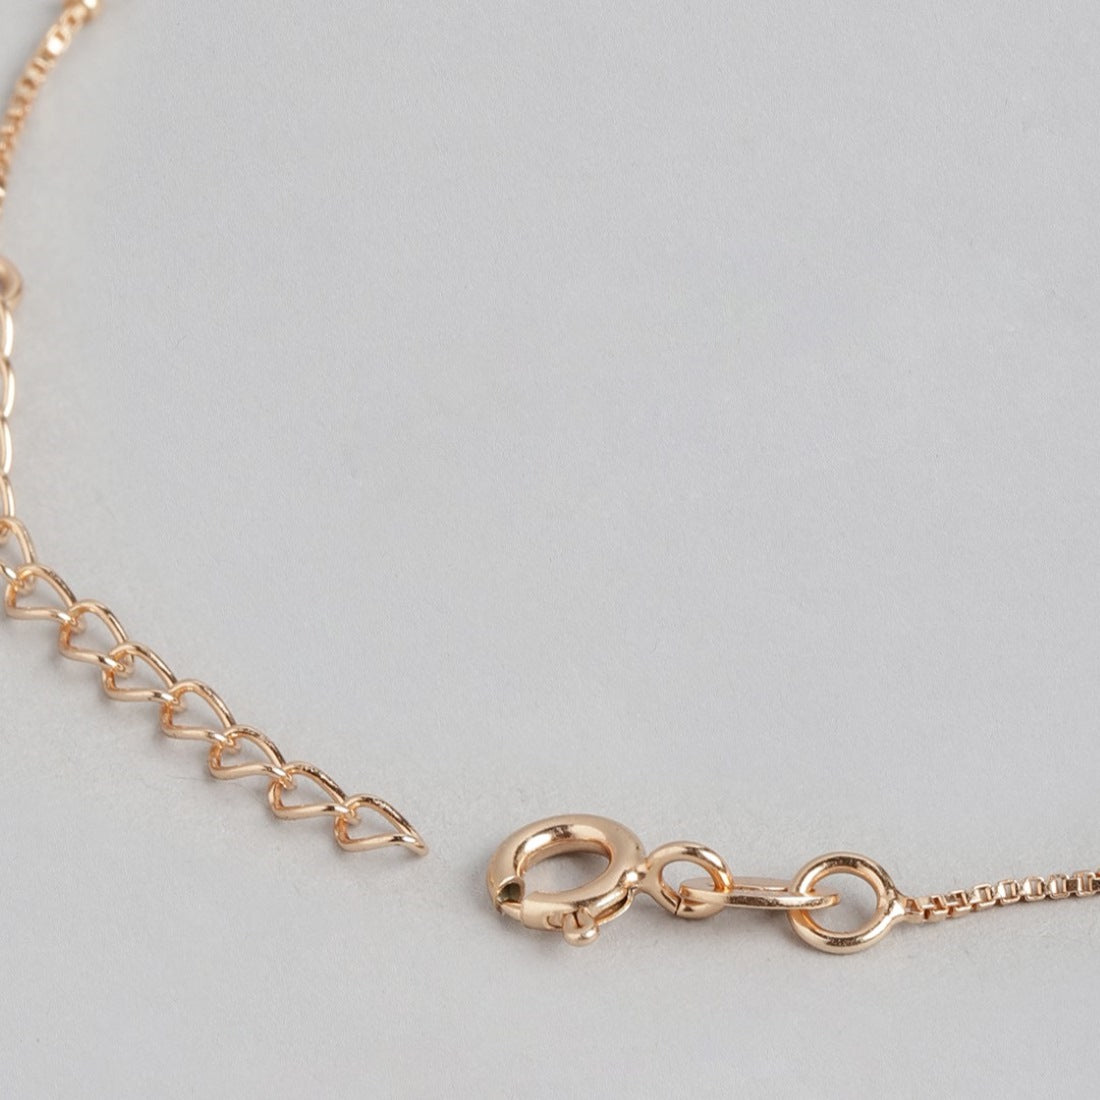 Rosy Romance Rose Gold-Plated 925 Sterling Silver Bracelet with Dual Hearts